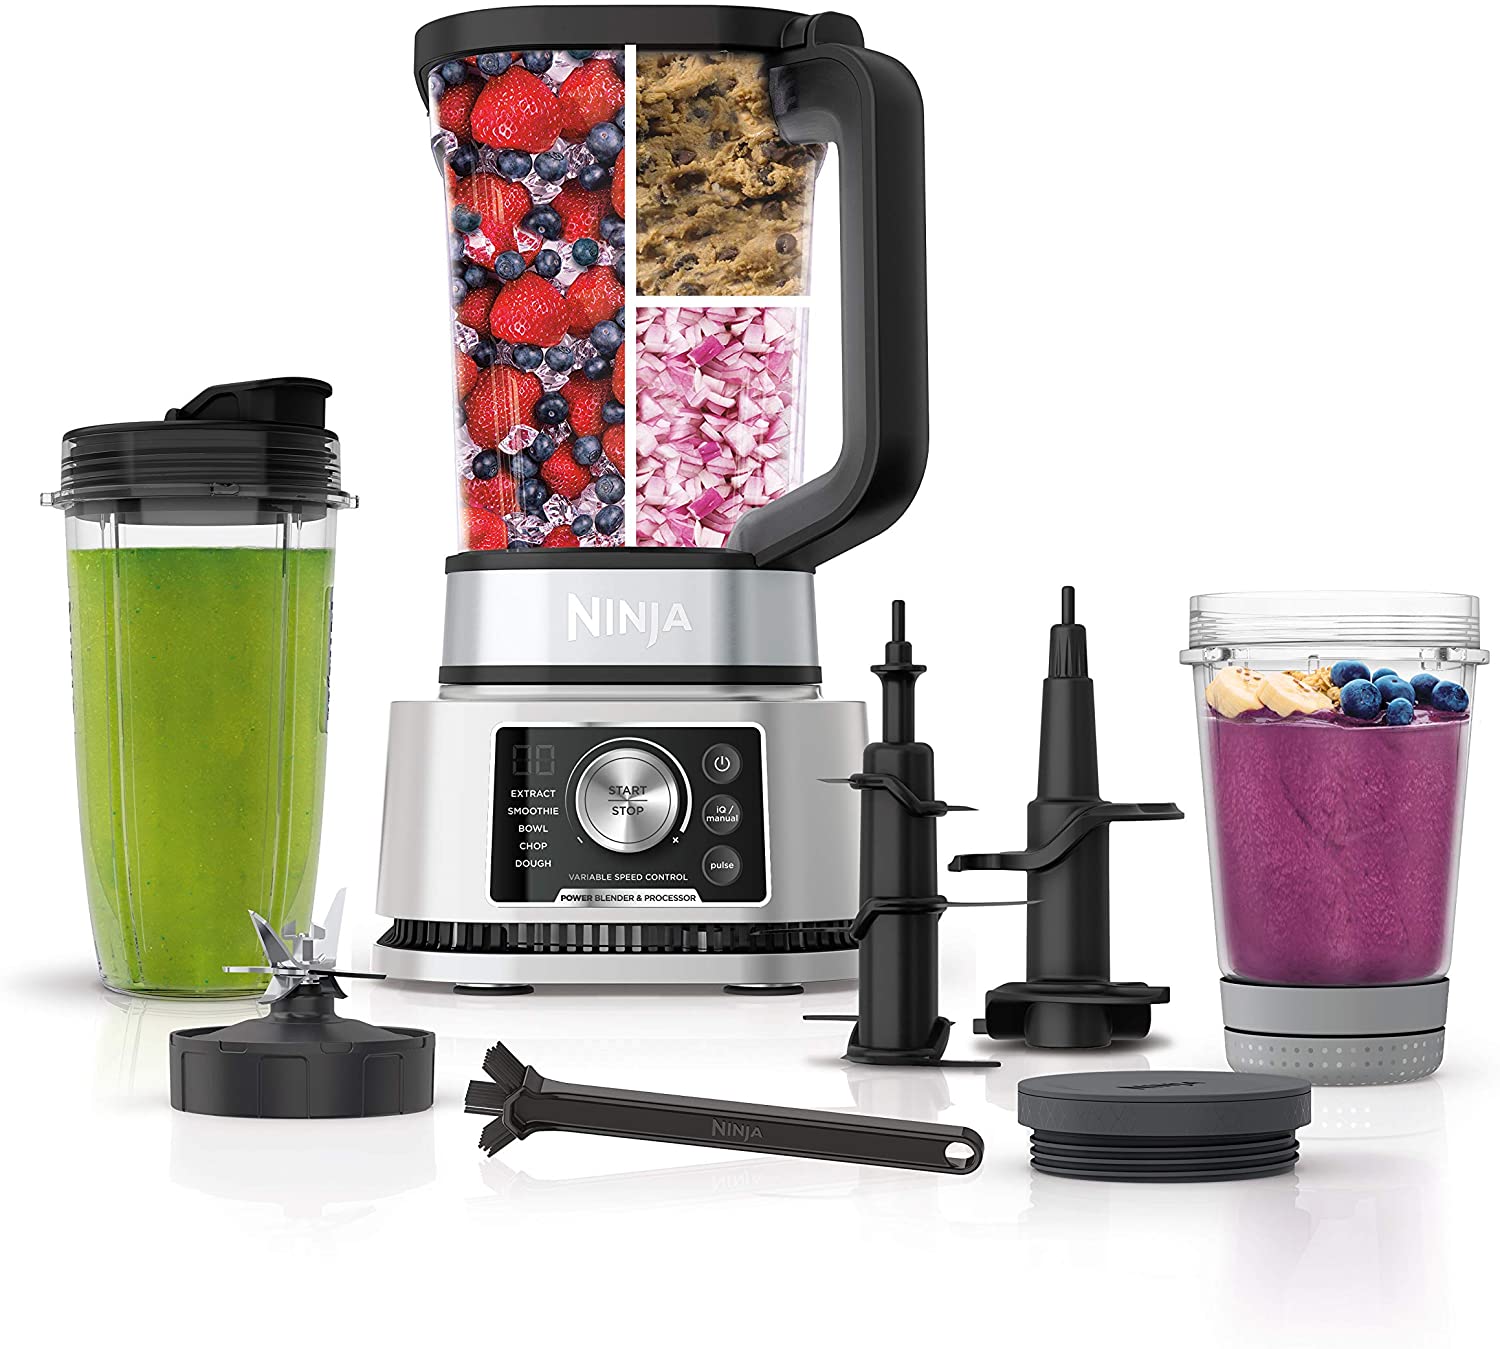 Ninja Foodi Power Nutri Duo Smoothie Bowl and Personal Blender System